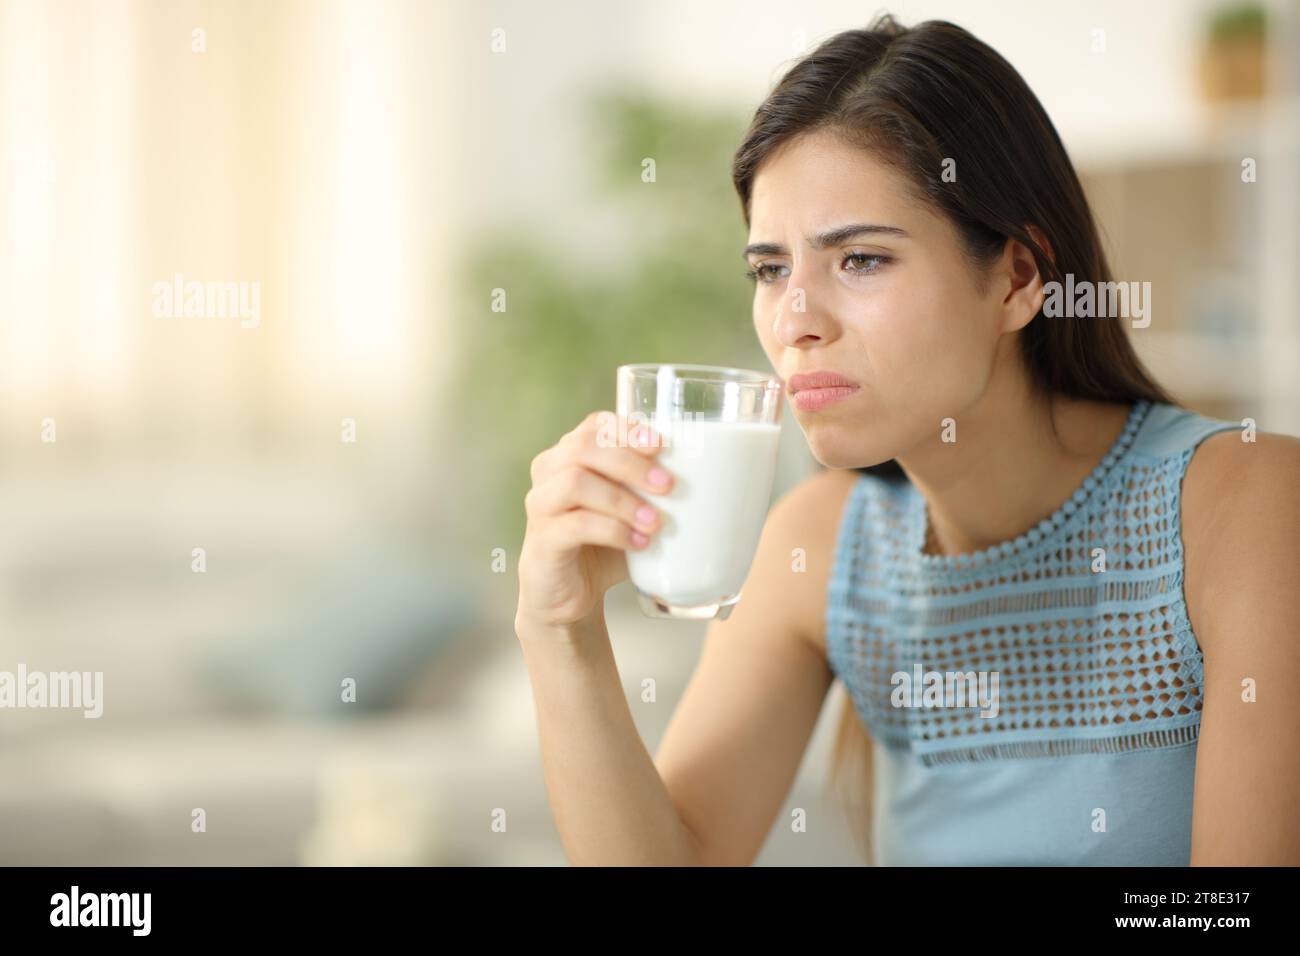 Disgusted woman smelling expired milk at home Stock Photo